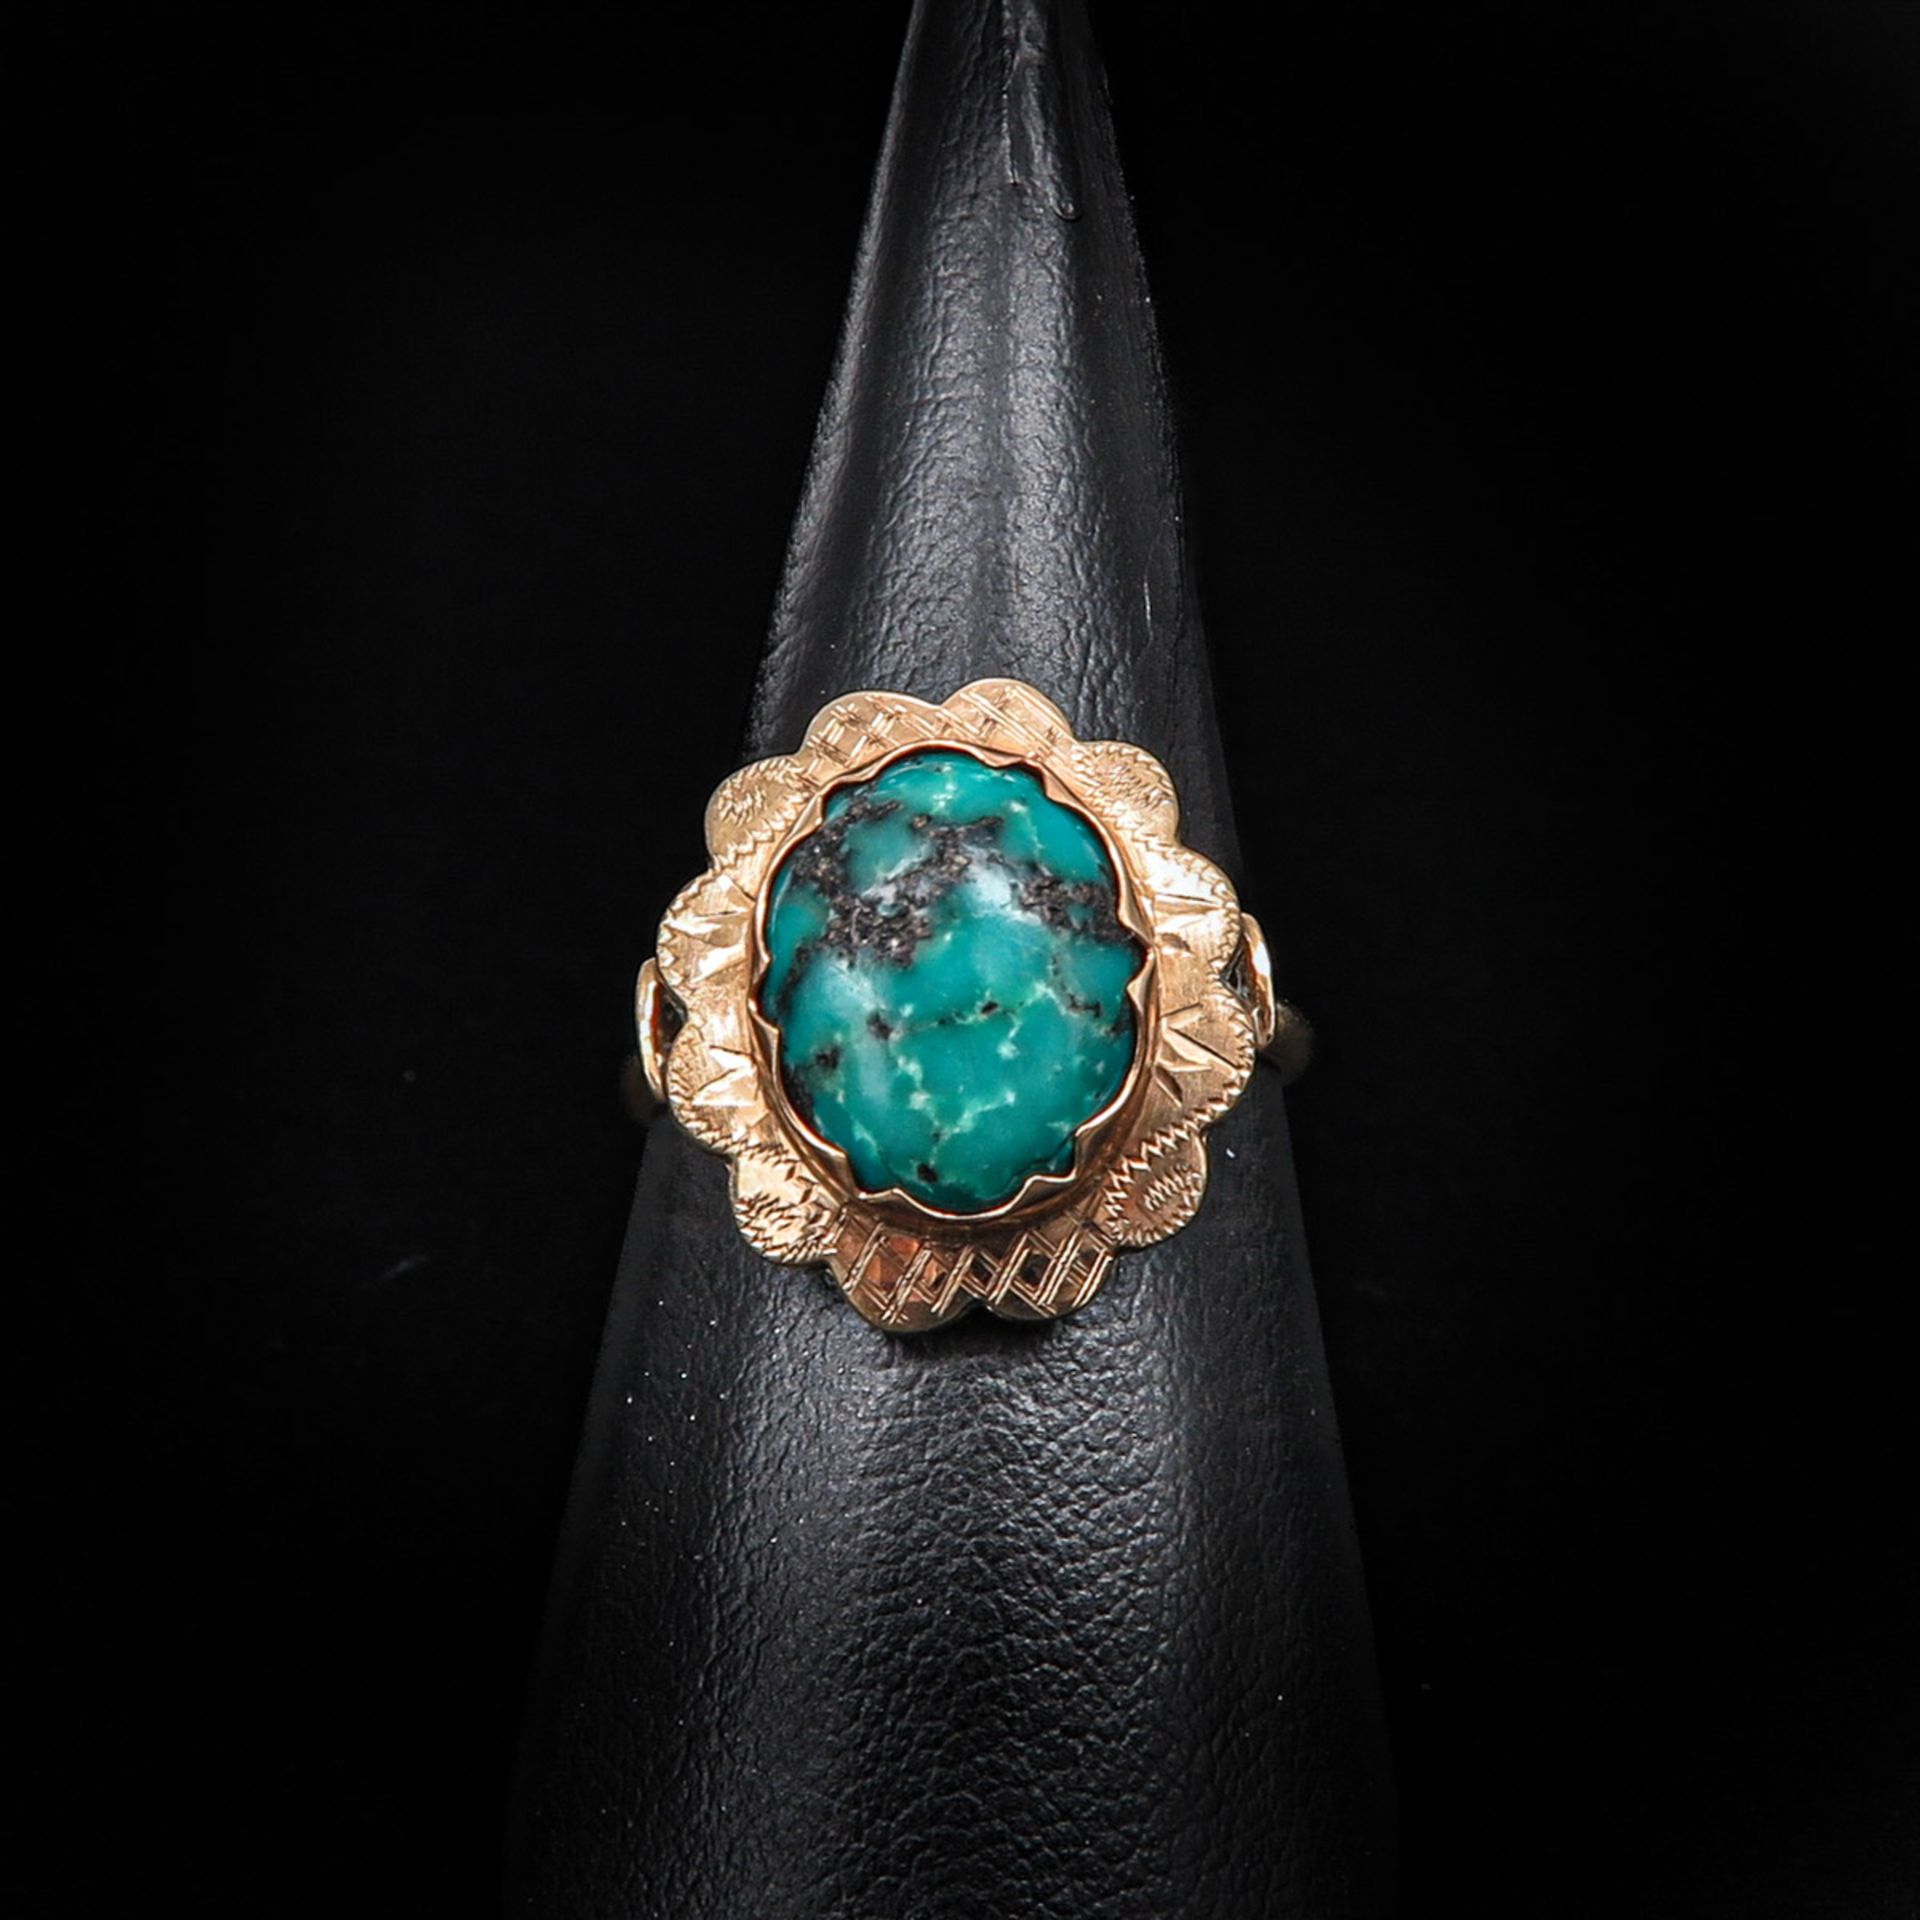 A Turquoise Necklace and Ring along with a Garnet Necklace and Ring - Image 4 of 7